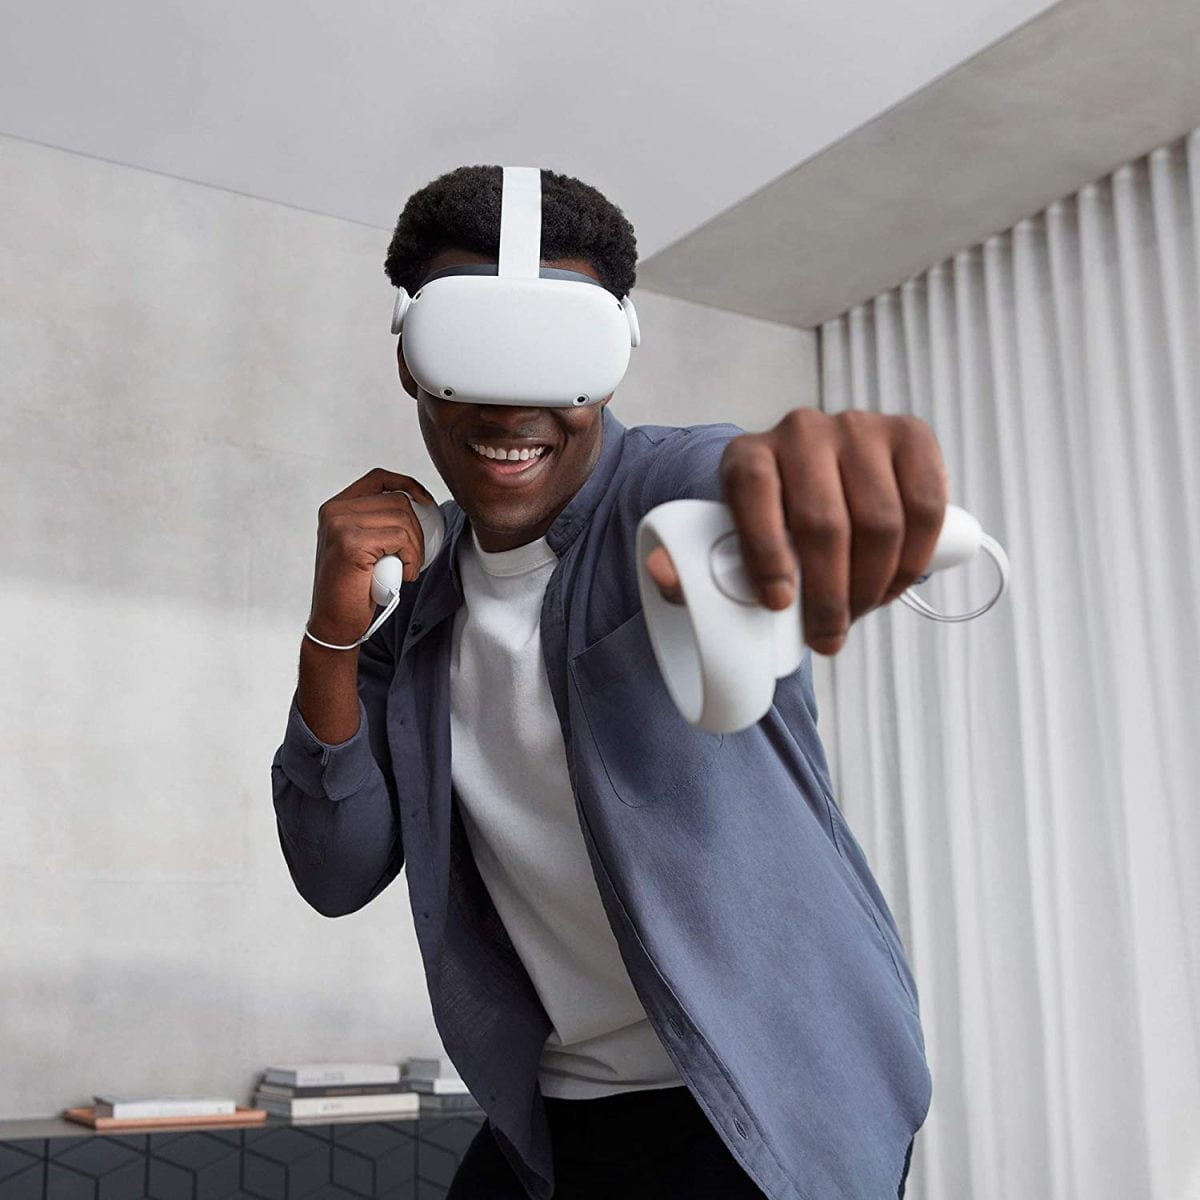 Oculus &Lt;H1&Gt;Oculus Quest 2 128 Gb Advanced All-In-One Virtual Reality Headset&Lt;/H1&Gt; Https://Youtu.be/Atvgl9Wojsm &Lt;Ul Class=&Quot;A-Unordered-List A-Vertical A-Spacing-Mini&Quot;&Gt; &Lt;Li&Gt;&Lt;Span Class=&Quot;A-List-Item&Quot;&Gt;Voltage: 100-240 V&Lt;/Span&Gt;&Lt;/Li&Gt; &Lt;Li&Gt;&Lt;Span Class=&Quot;A-List-Item&Quot;&Gt;Next-Level Hardware - Make Every Move Count With A Blazing-Fast Processor And Our Highest-Resolution Display&Lt;/Span&Gt;&Lt;/Li&Gt; &Lt;Li&Gt;&Lt;Span Class=&Quot;A-List-Item&Quot;&Gt;All-In-One Gaming - With Backward Compatibility, You Can Explore New Titles And Old Favorites In The Expansive Quest Content Library&Lt;/Span&Gt;&Lt;/Li&Gt; &Lt;Li&Gt;&Lt;Span Class=&Quot;A-List-Item&Quot;&Gt;Immersive Entertainment - Get The Best Seat In The House To Live Concerts, Groundbreaking Films, Exclusive Events And More&Lt;/Span&Gt;&Lt;/Li&Gt; &Lt;Li&Gt;&Lt;Span Class=&Quot;A-List-Item&Quot;&Gt;Easy Setup - Just Open The Box, Set Up With The Smartphone App And Jump Into Vr. No Pc Or Console Needed. Requires Wireless Internet Access And The Oculus App (Free Download) To Set Up Device Premium Display - Catch Every Detail With A Stunning Display That Features 50% More Pixels Than The Original Quest Ultimate Control - Redesigned Oculus Touch Controllers Transport Your Movements Directly Into Vr With Intuitive Controls Pc Vr Compatible - Step Into Incredible Oculus Rift Titles By Connecting An Oculus Link Cable To A Compatible Gaming Pc. Oculus Link Cable Sold Separately 3D Cinematic Sound - Hear In All Directions With Built-In Speakers That Deliver Cinematic 3D Positional Audio&Lt;/Span&Gt;&Lt;/Li&Gt; &Lt;/Ul&Gt; &Nbsp; Oculus Quest Meta Quest 2 128 Gb Advanced All-In-One Virtual Reality Headset